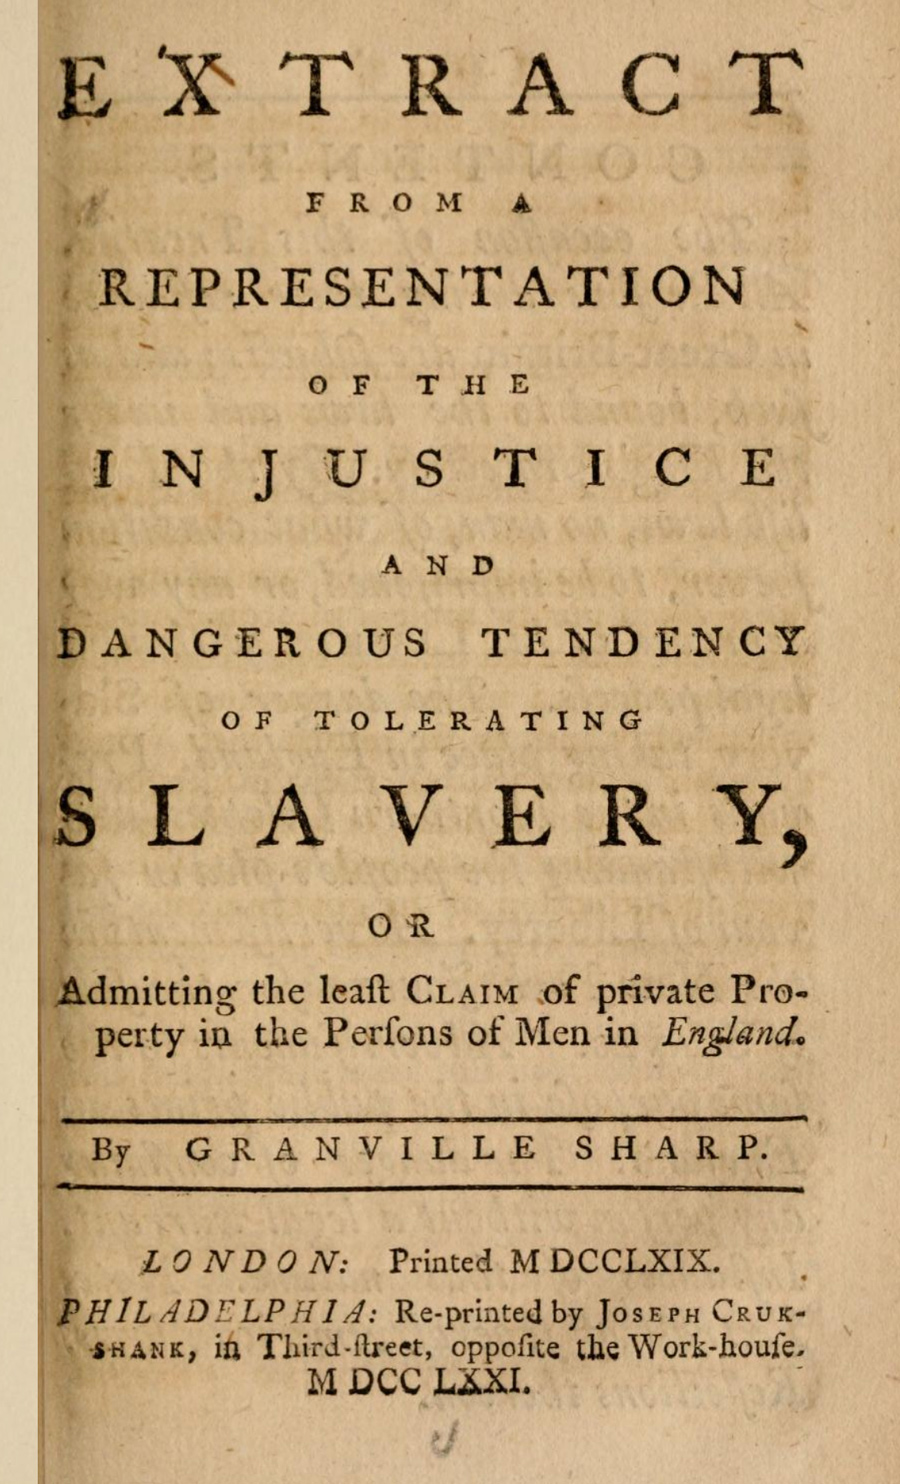 the title page